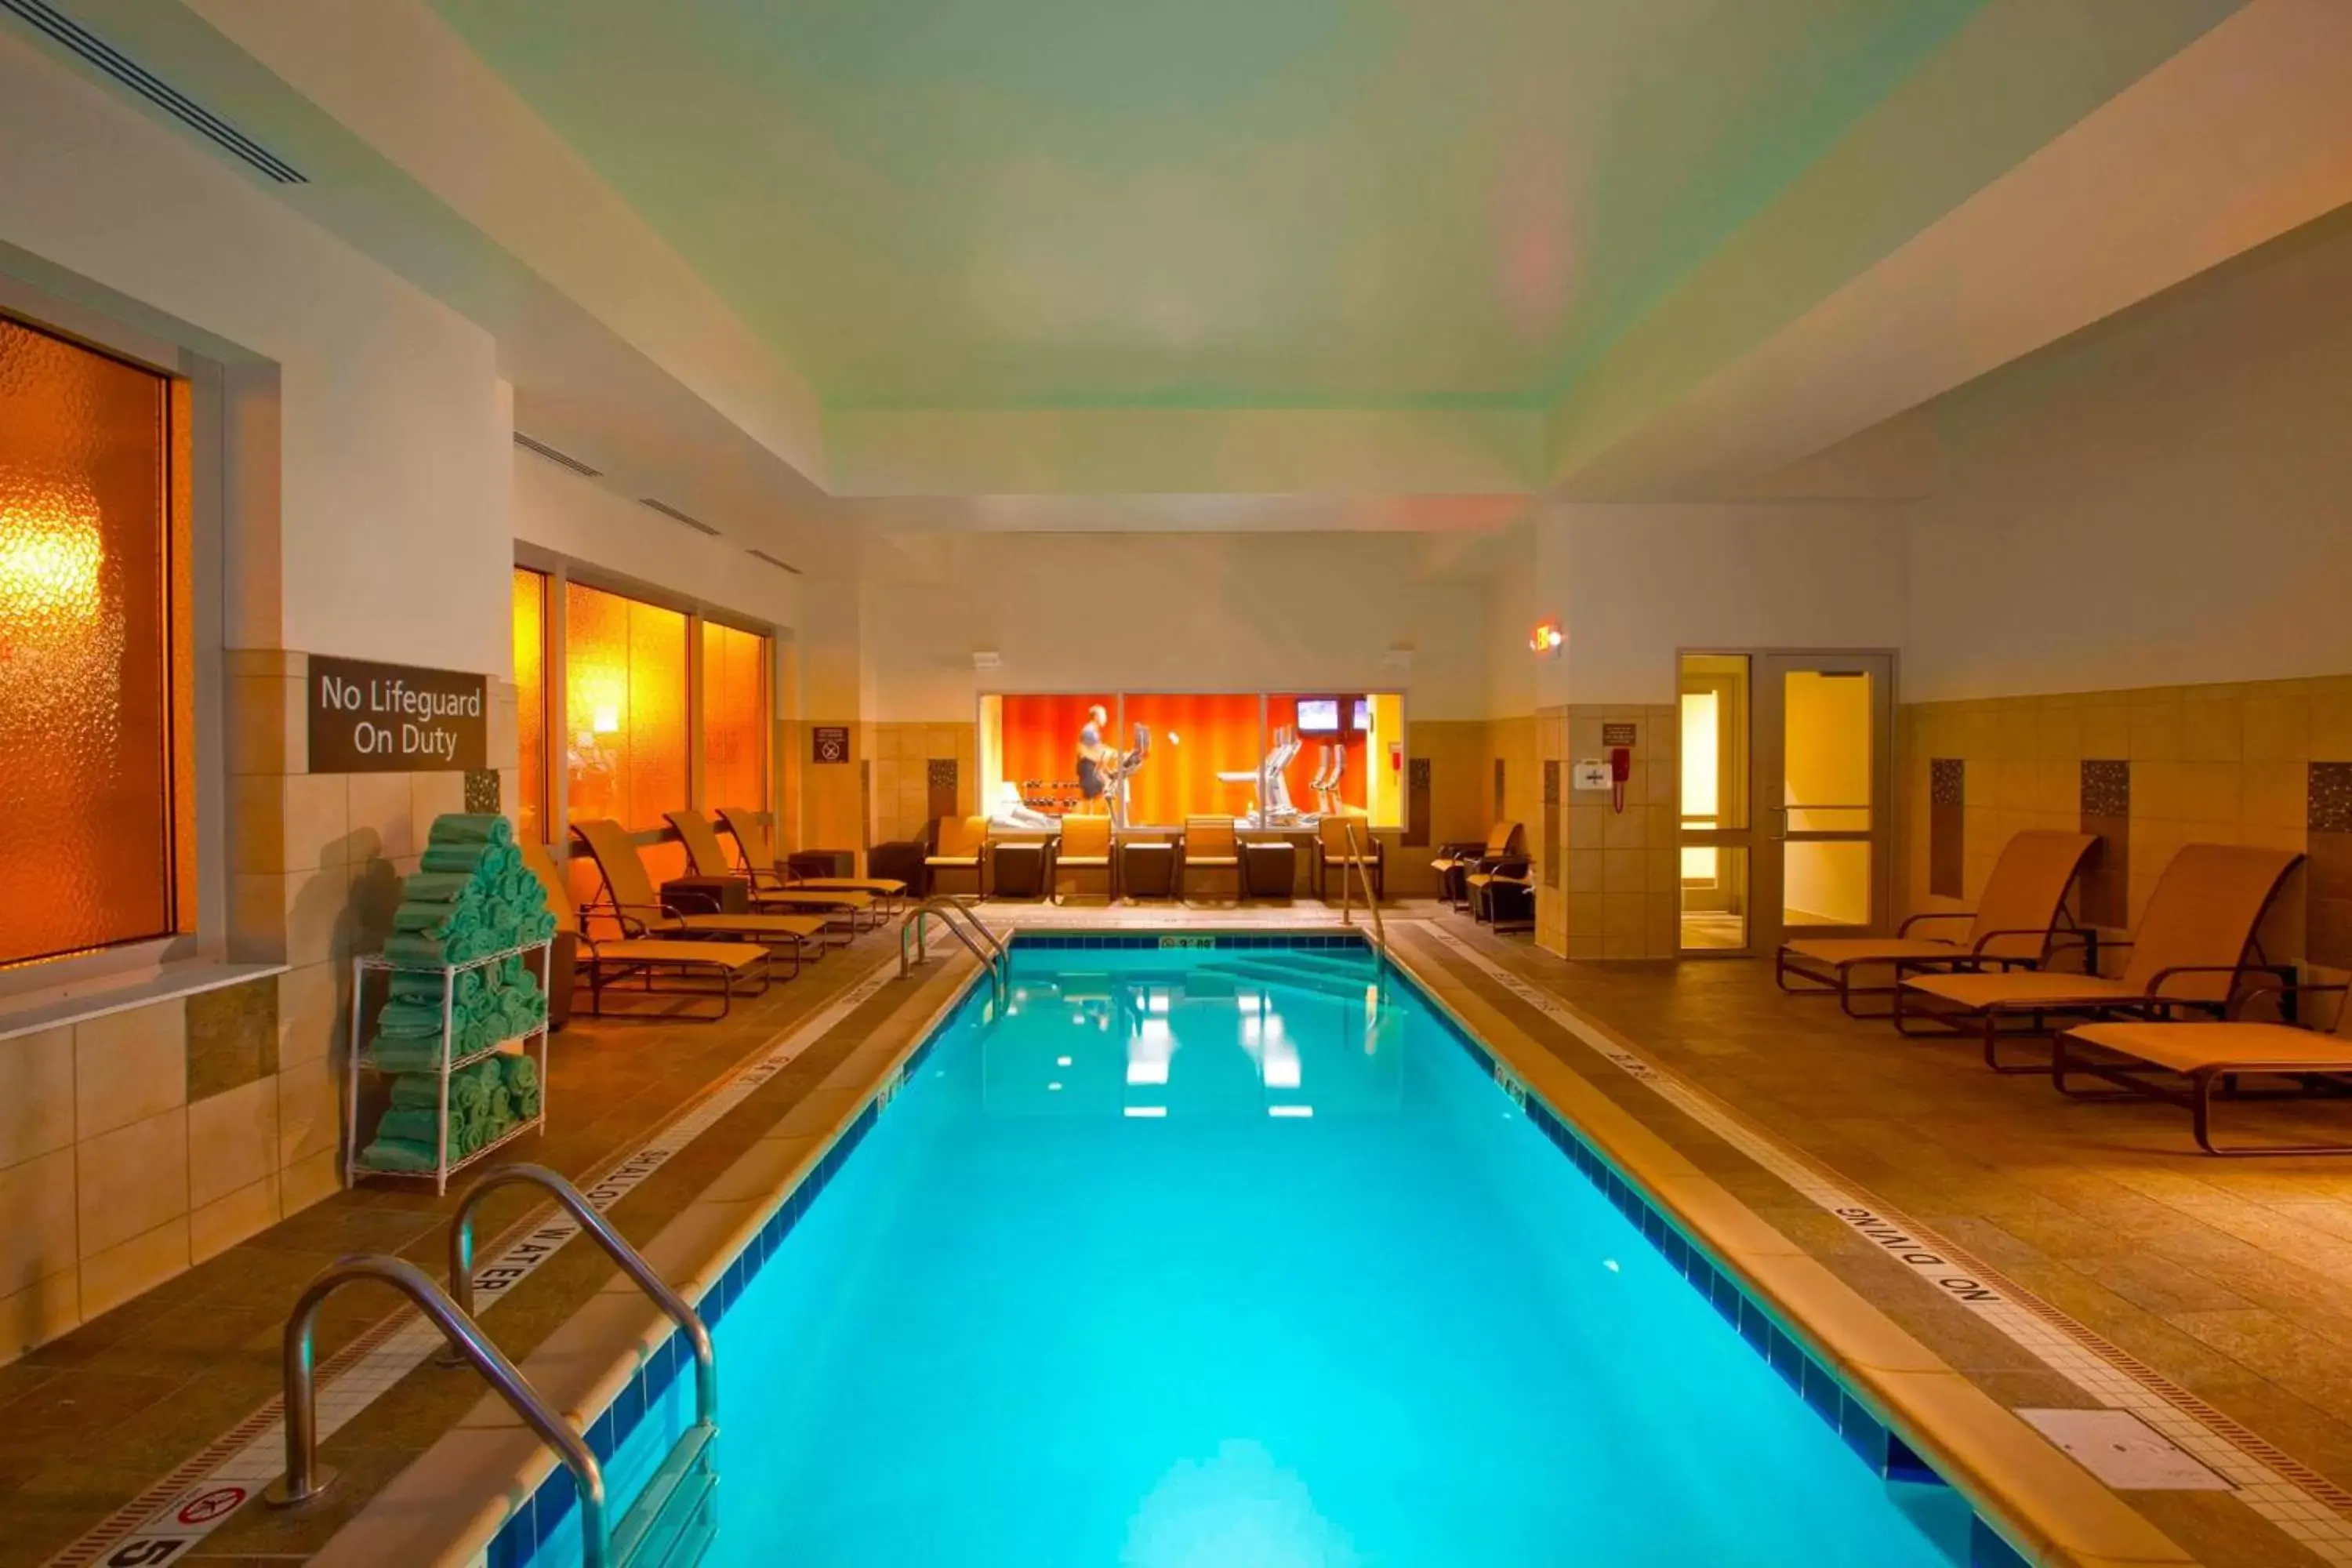 Swimming Pool in Residence Inn Pittsburgh North Shore